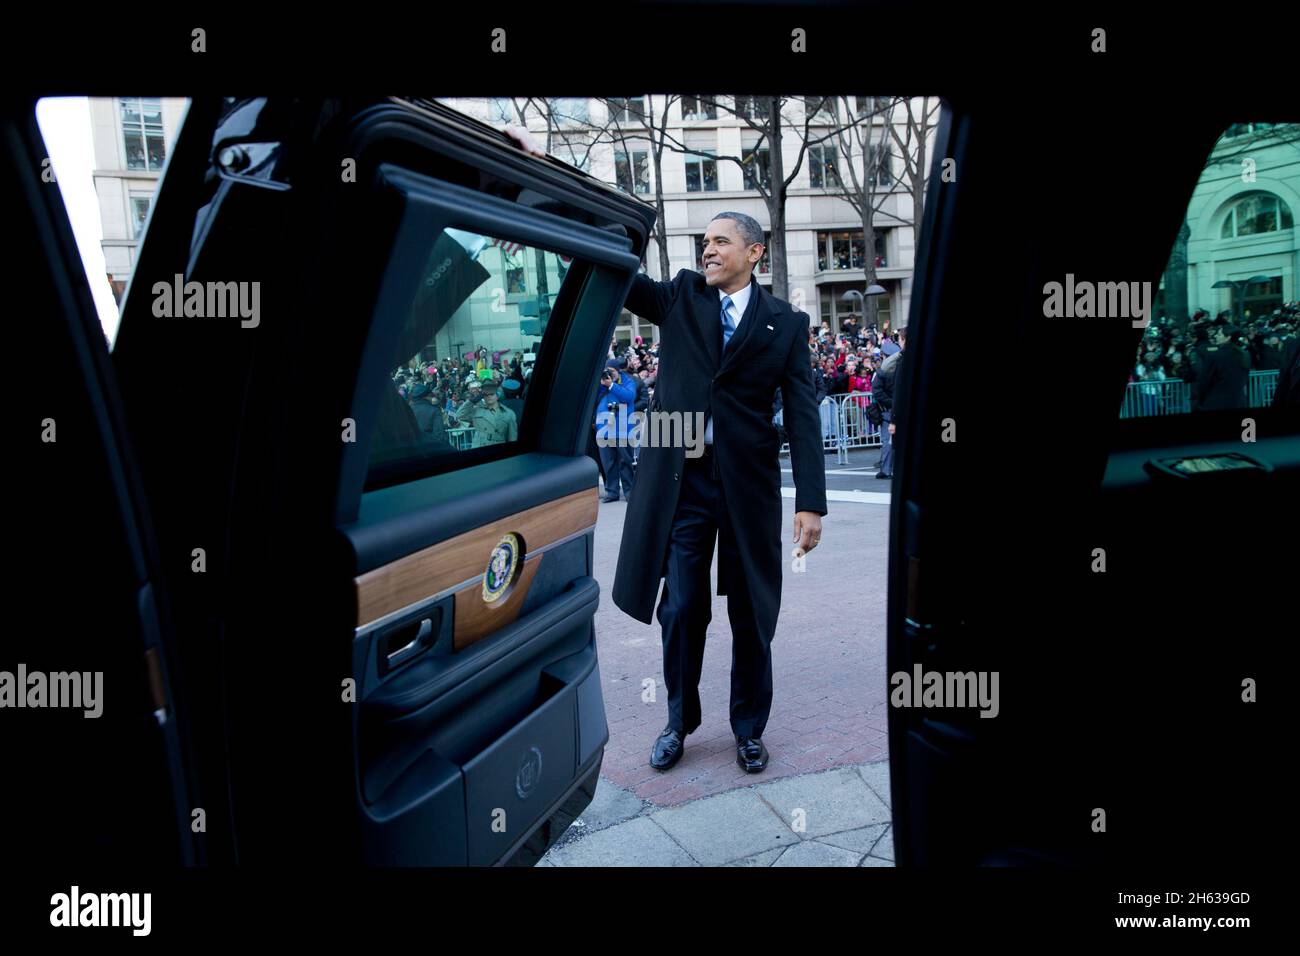 President Barack Obama waves to parade-goers after walking in the inaugural parade along Pennsylvania Avenue in Washington, D.C., Jan. 21, 2013. Stock Photo